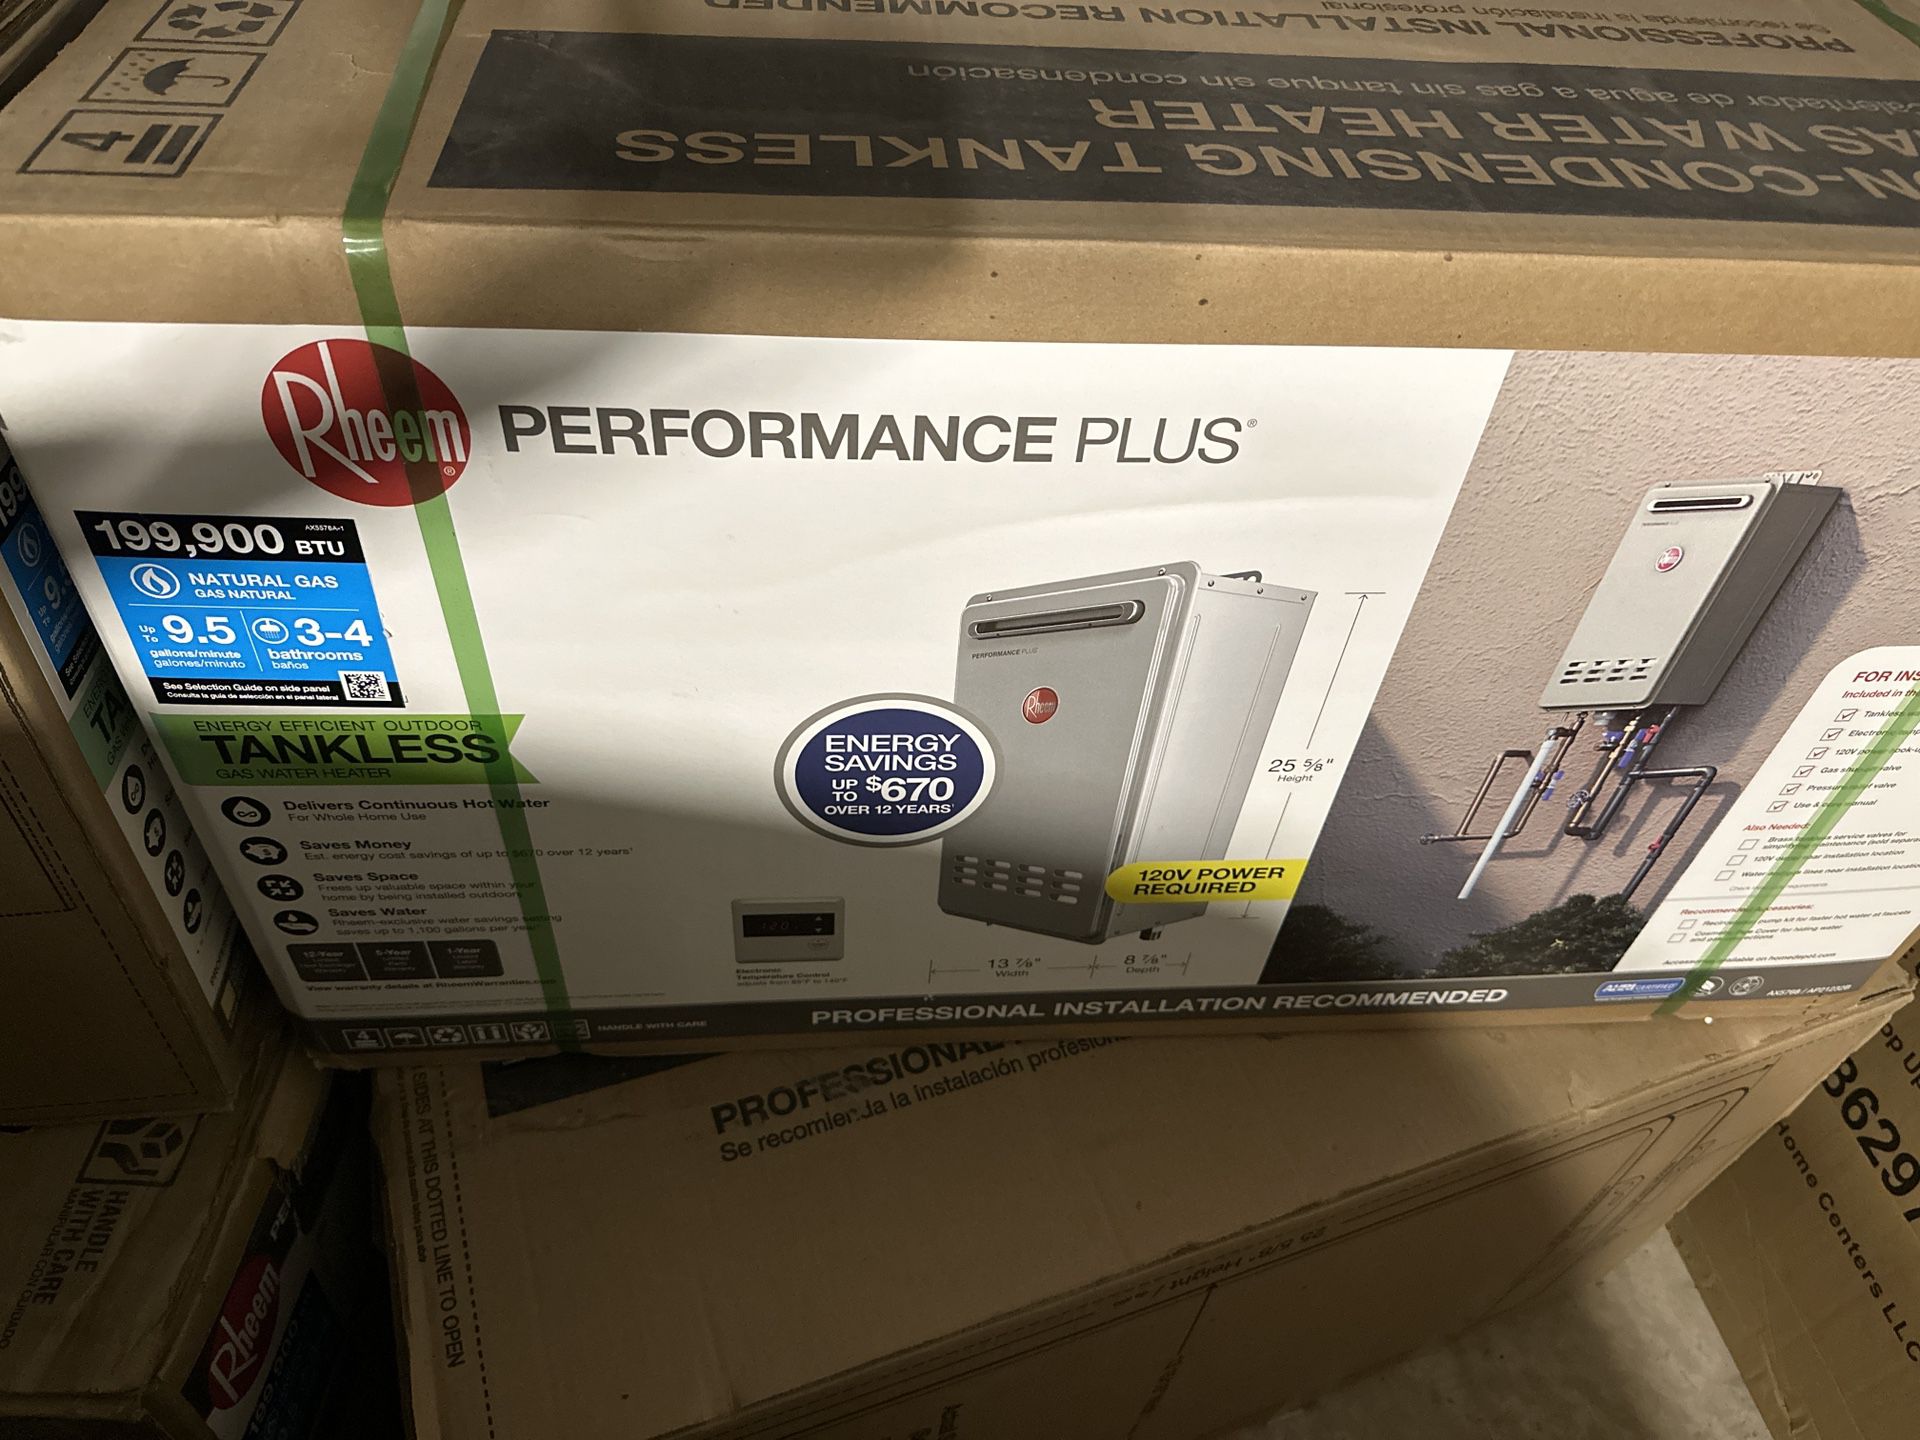 Rheem 9.5 GPM Natural Gas Outdoor Tankless Water Heater *Brand New*